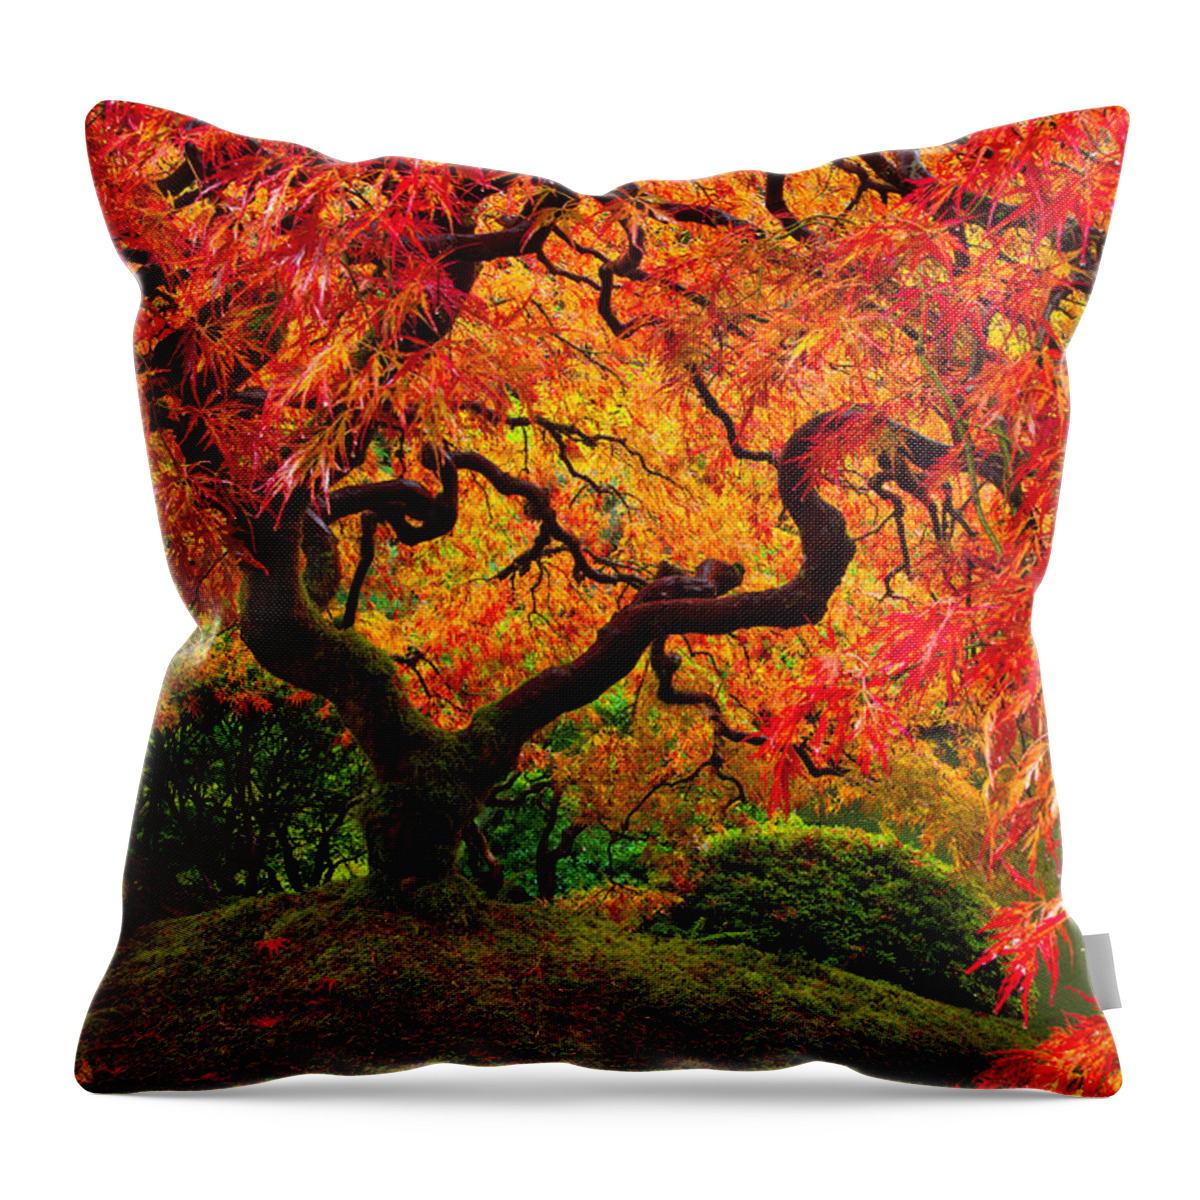 Portland Throw Pillow featuring the photograph Flaming Maple by Darren White